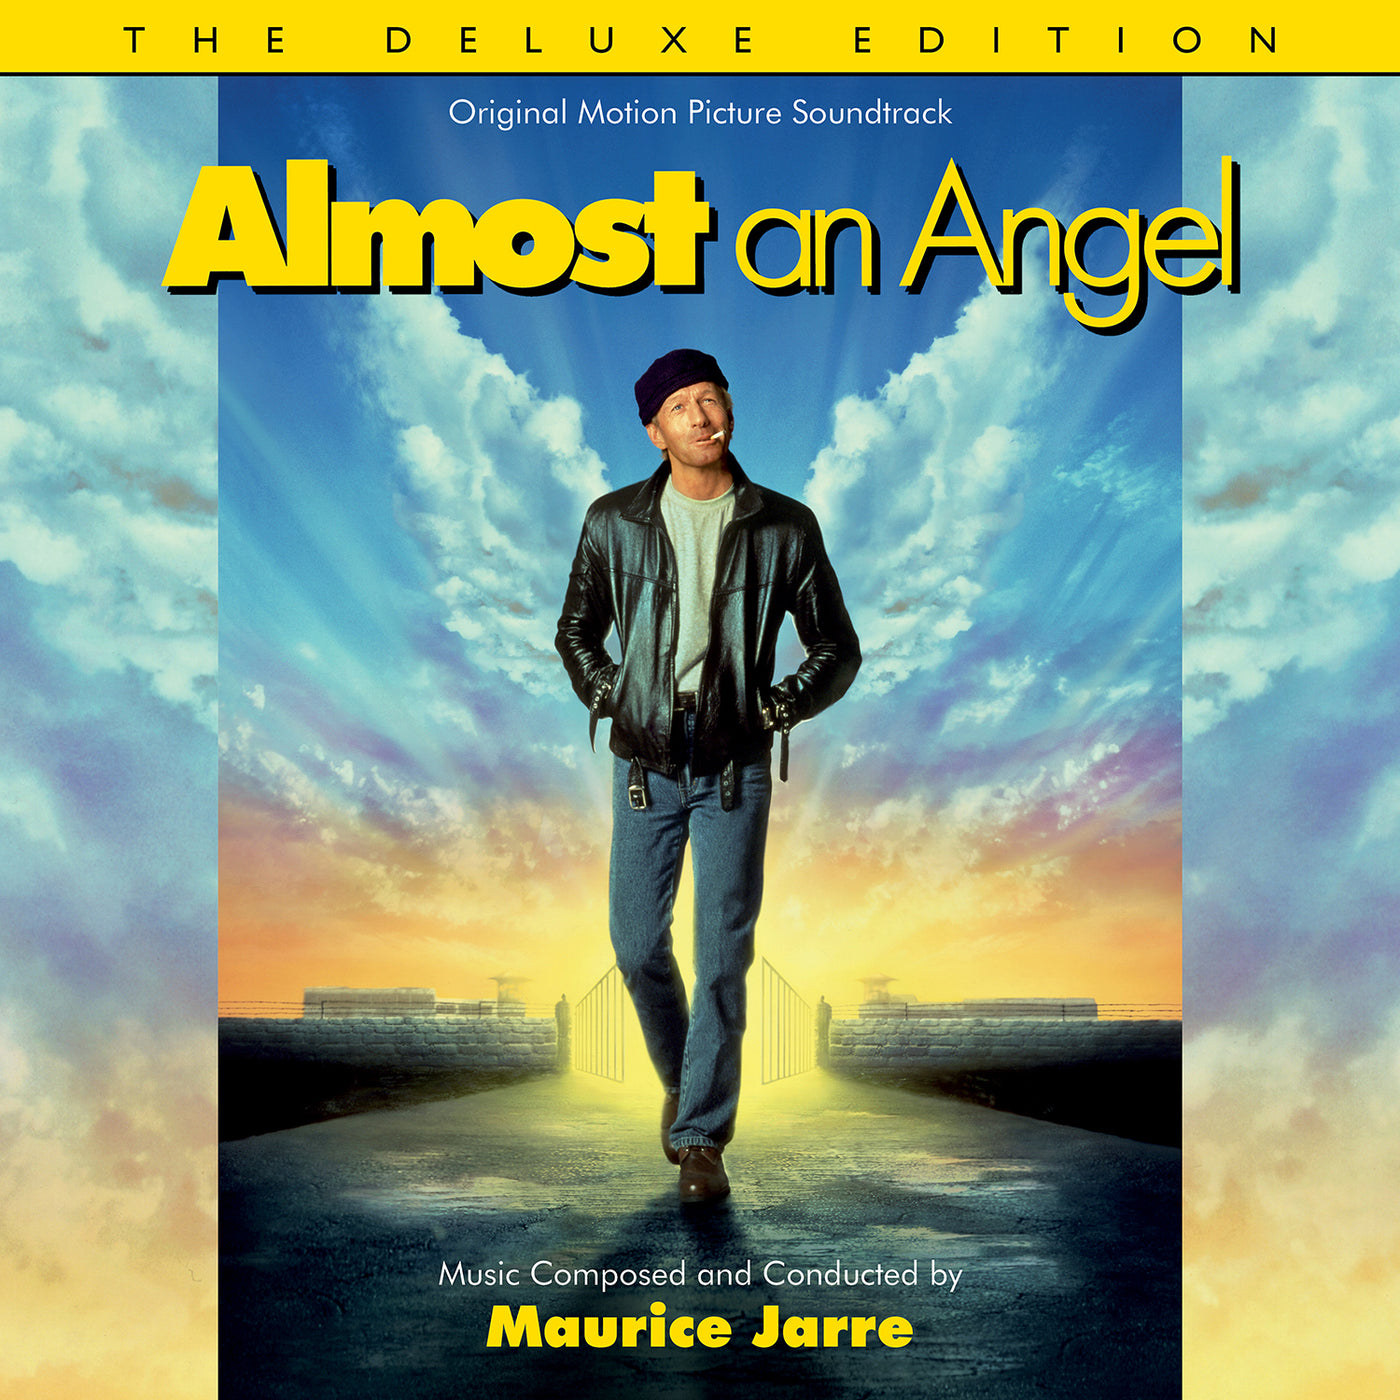 Almost An Angel: The Deluxe Edition (CD)